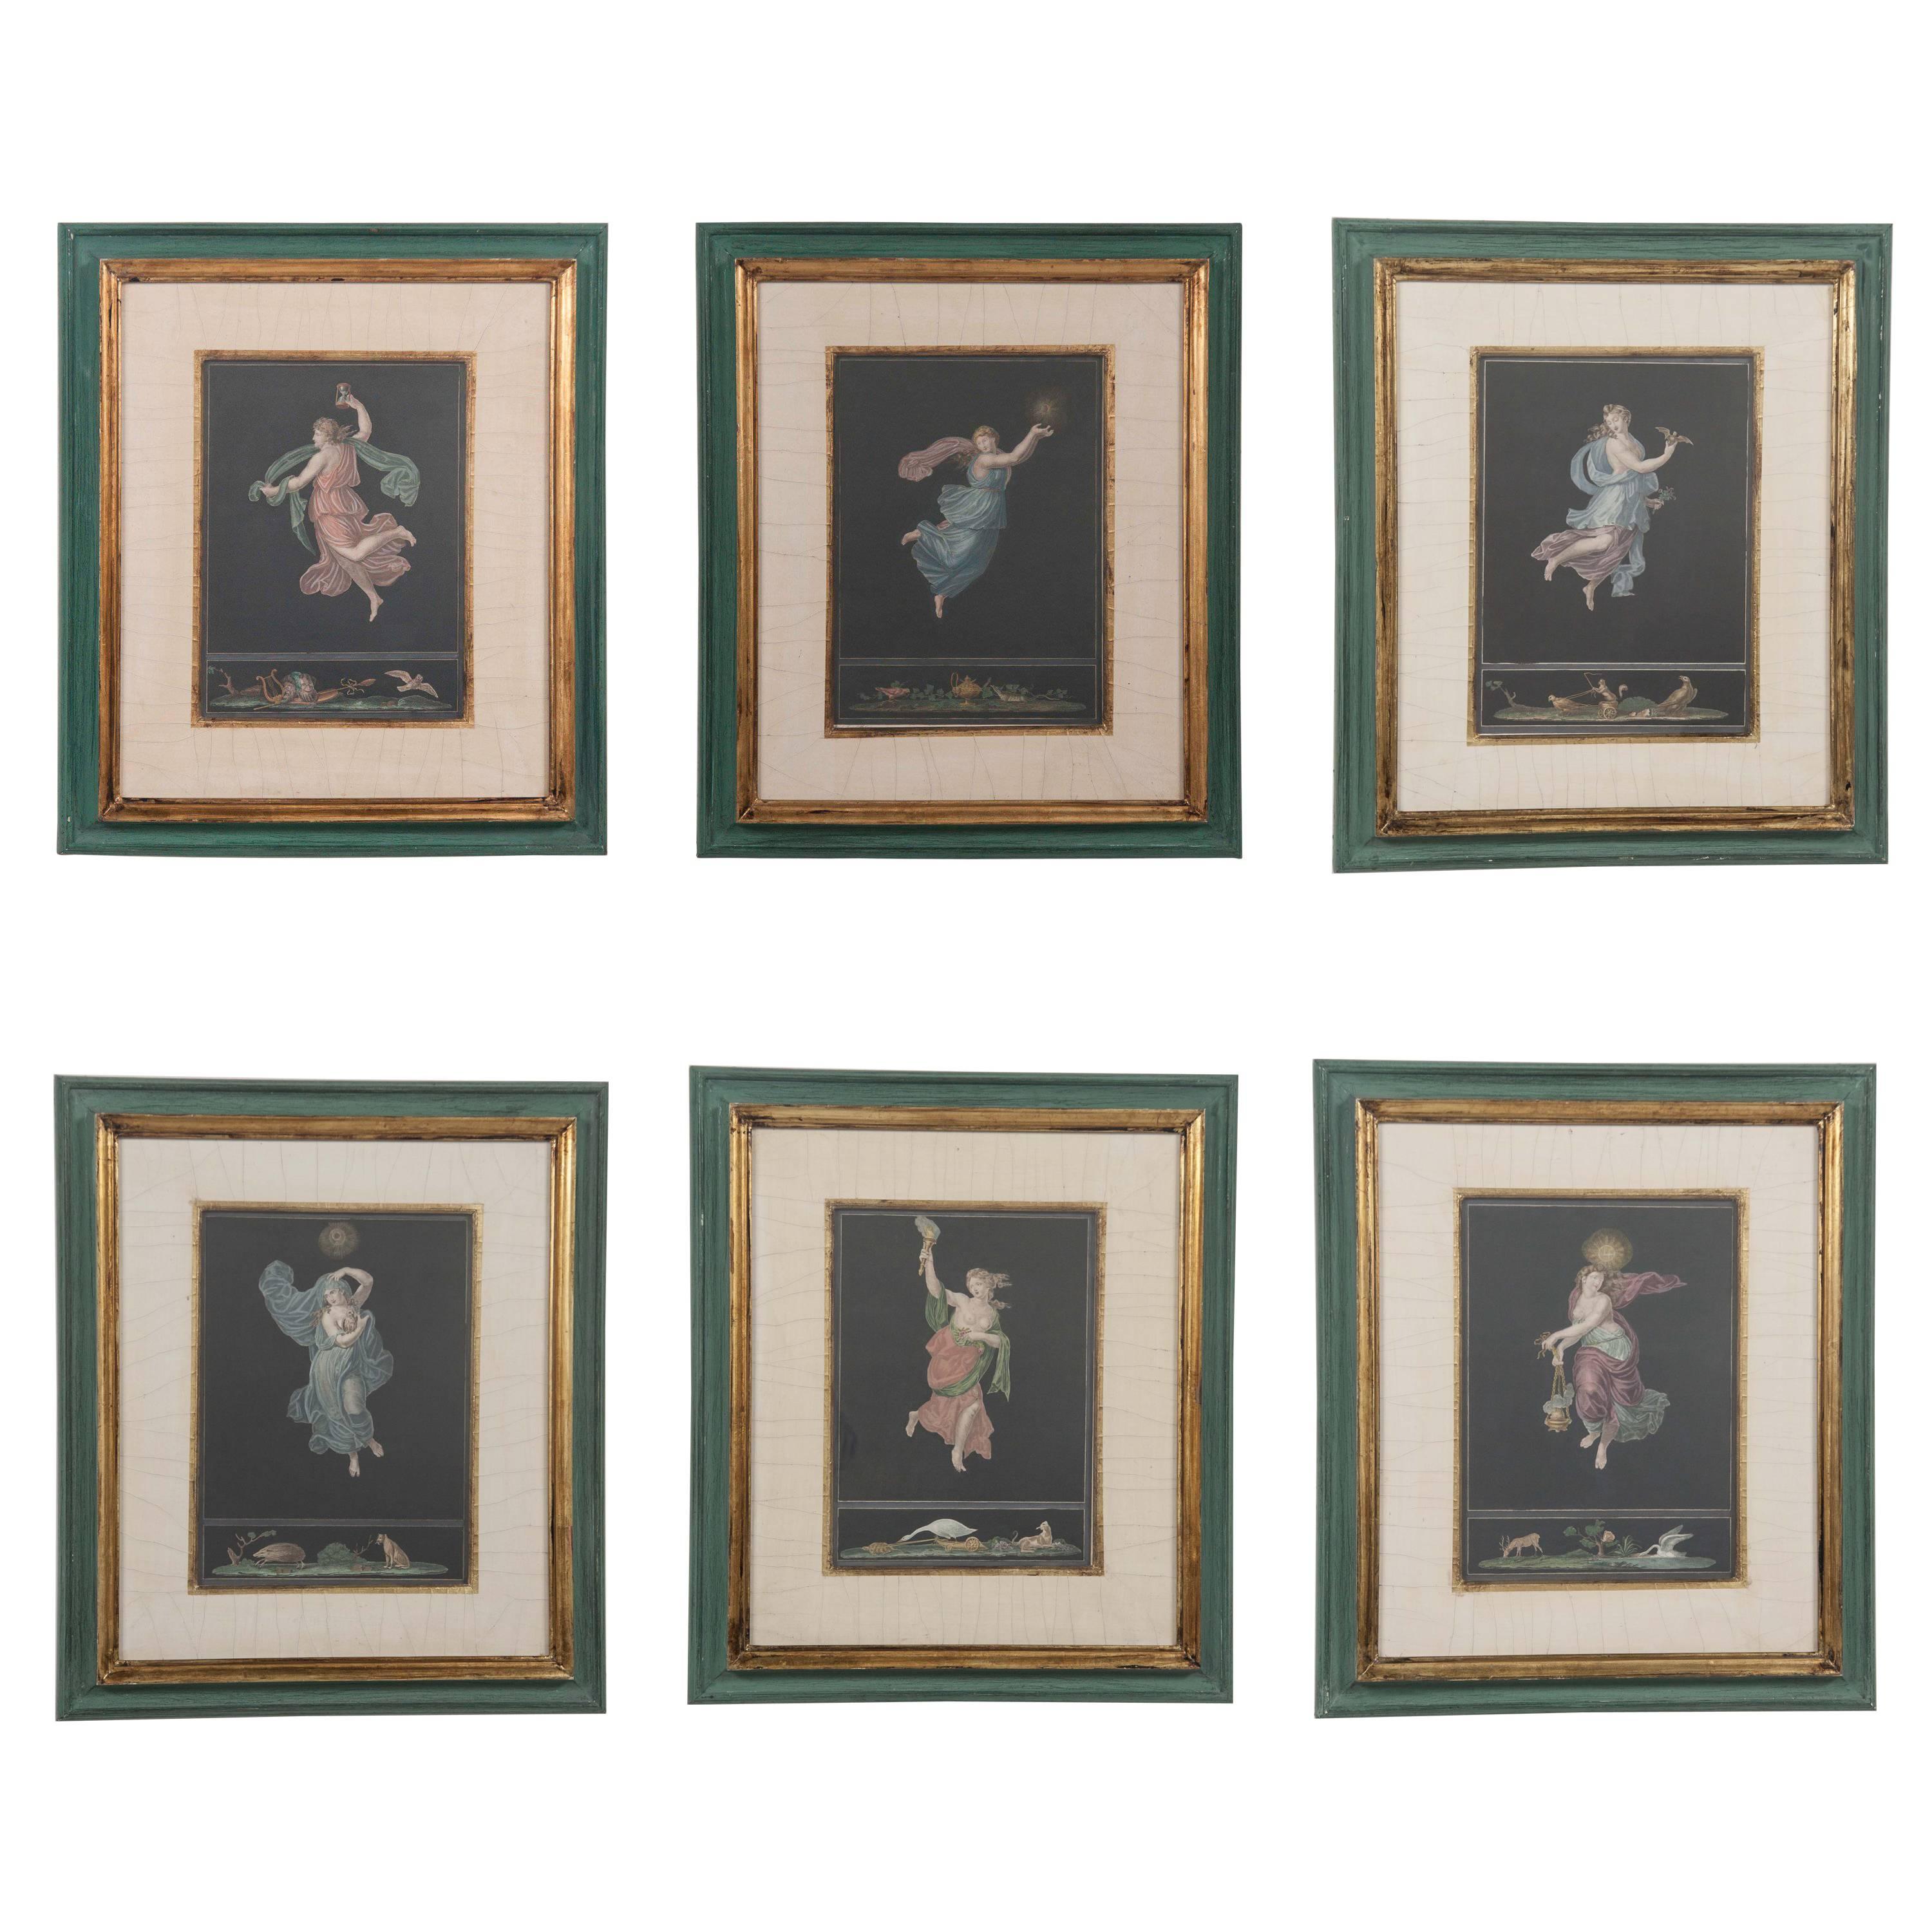 Six 19th Century hand-colored Engravings of Day and Night after Raphael